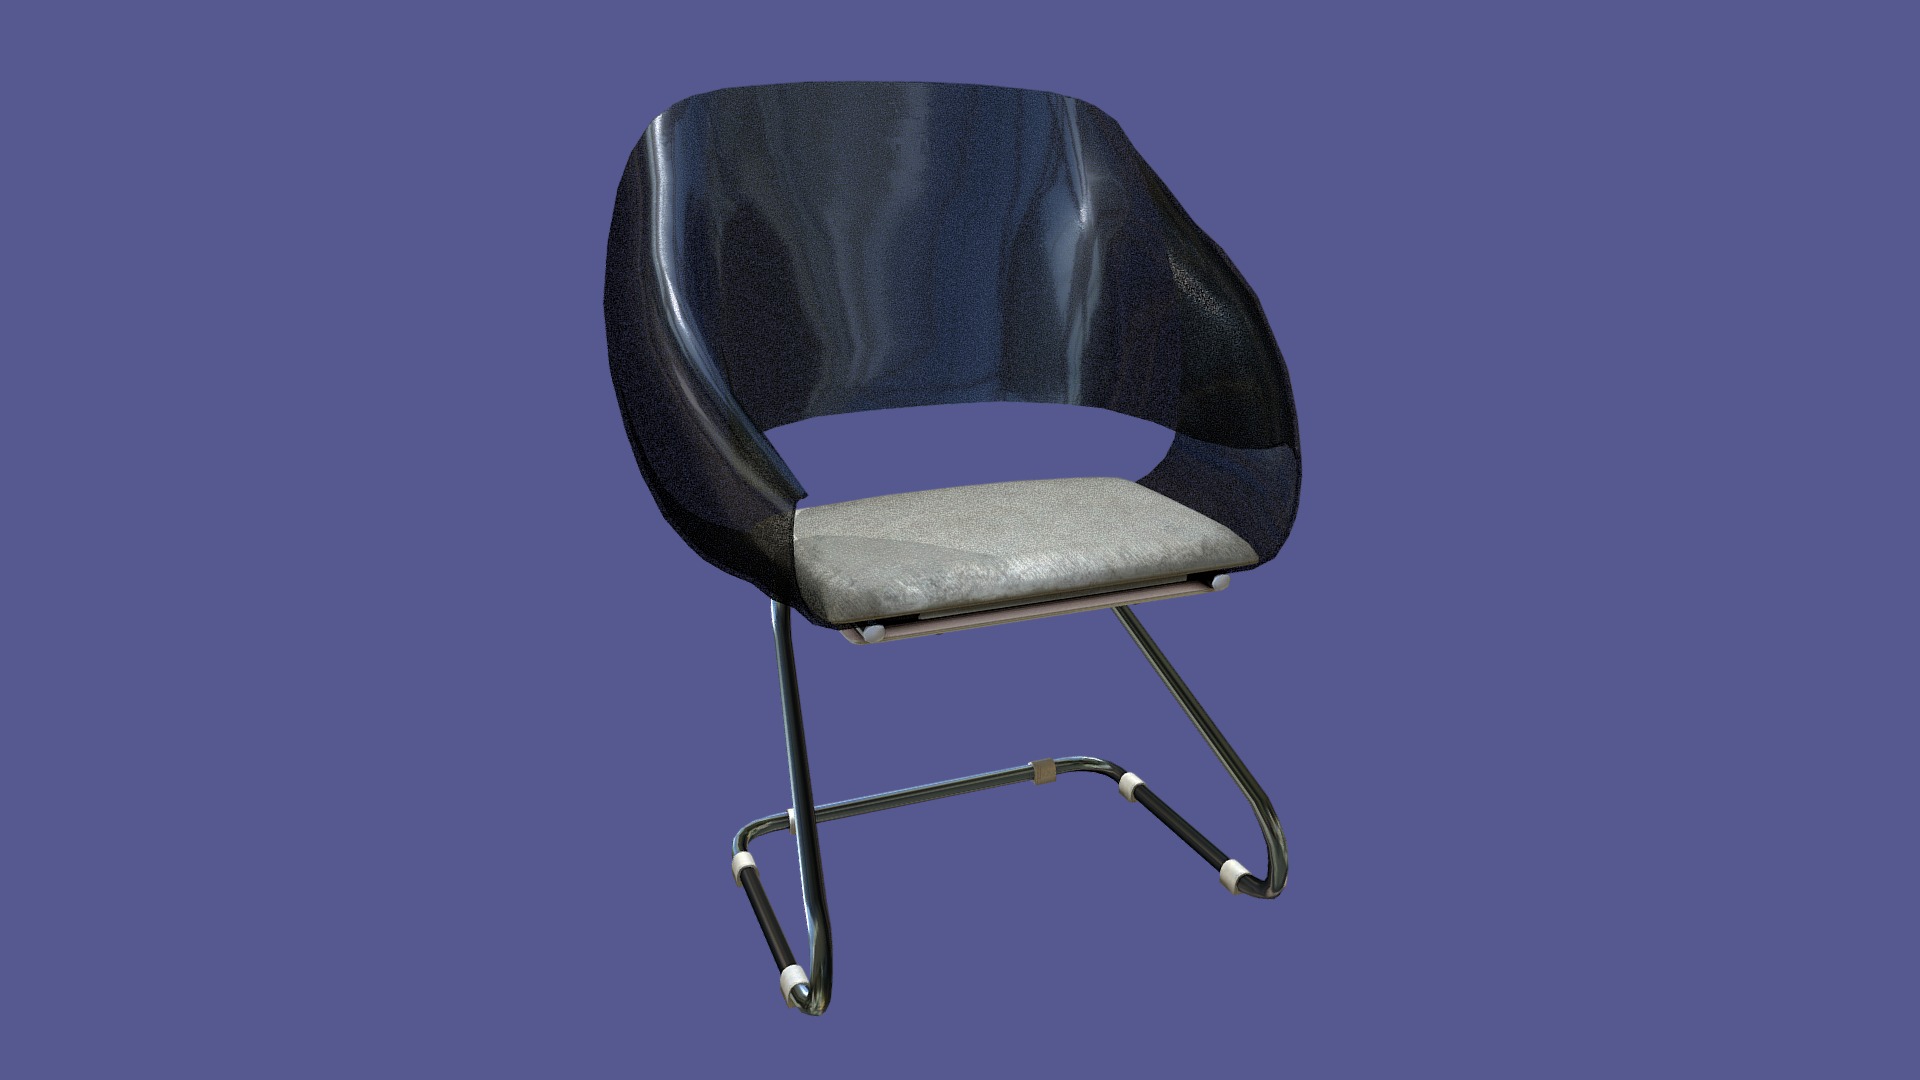 3D model Low poly 70’s retro vintage Chair - This is a 3D model of the Low poly 70's retro vintage Chair. The 3D model is about a chair with a cushion.